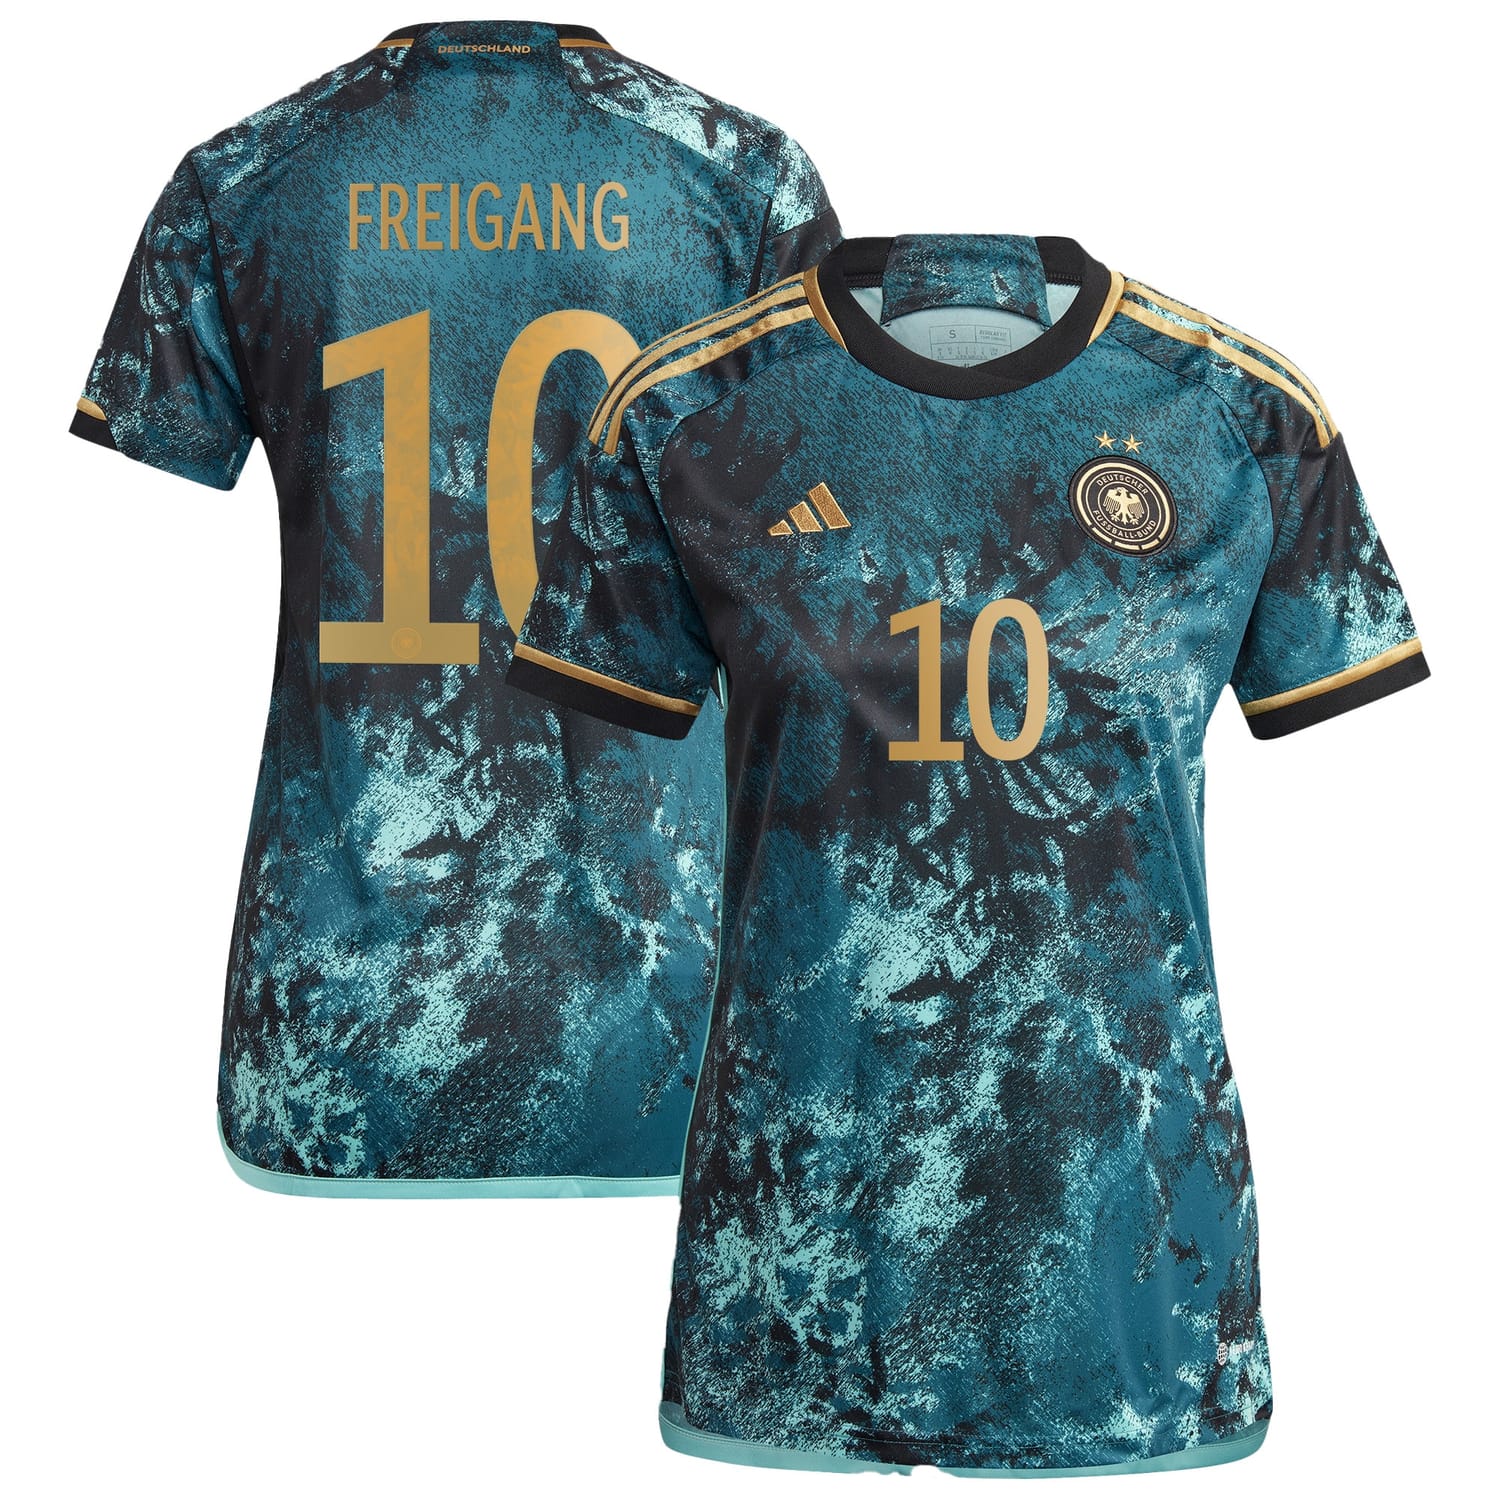 Germany National Team Away Jersey Shirt 2023 player Laura Freigang 10 printing for Women